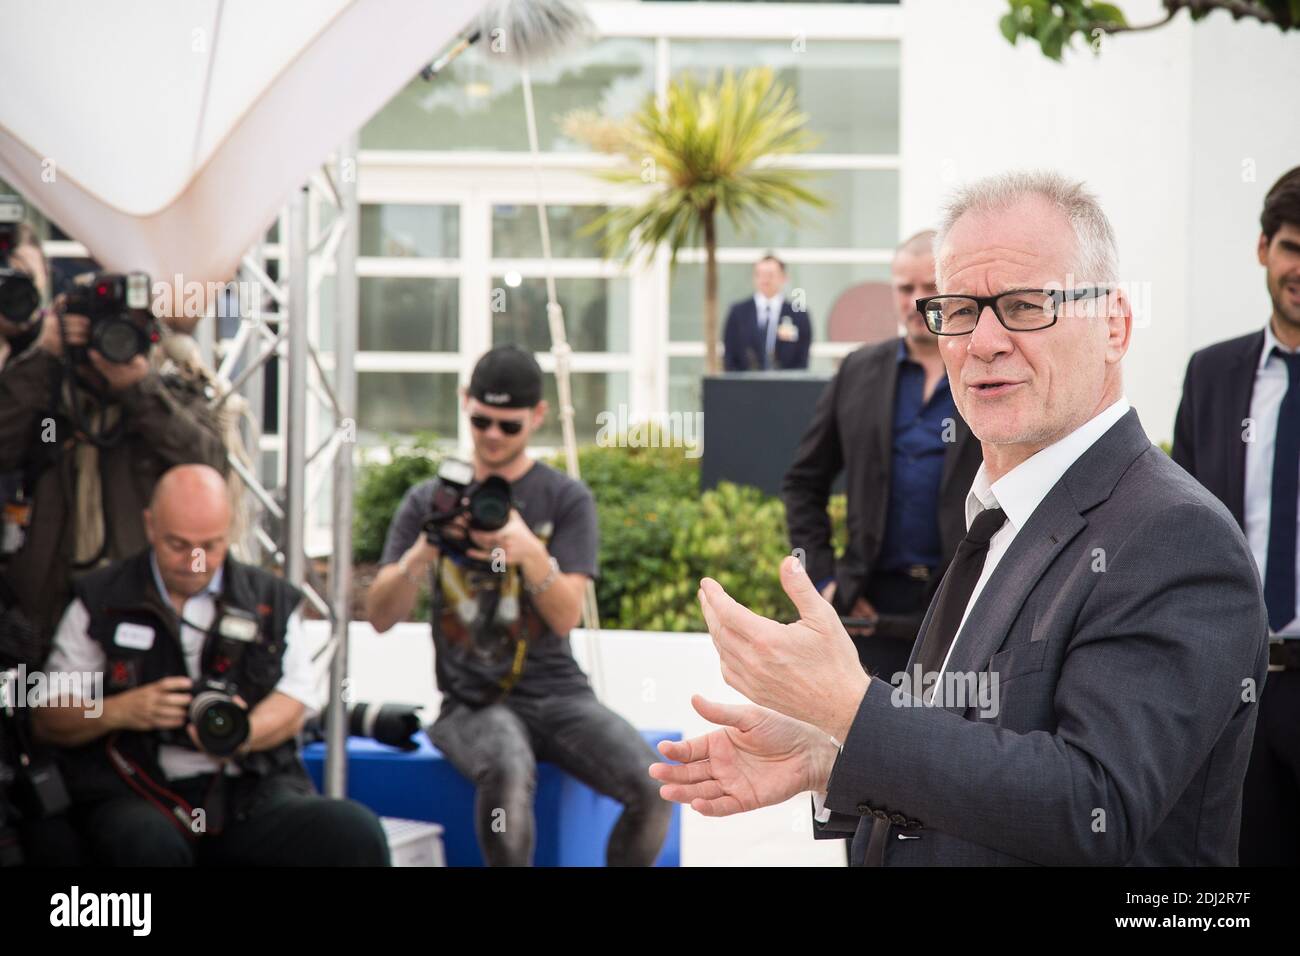 11/06/2016 - CANNES, FRANCE - THIERRY FREMAUX - 69EME FESTIVAL DE CANNES - PHOTOCALL 'CAFE SOCIETY' Photo by Nasser Berzane/ABACAPRESS.COM Stock Photo